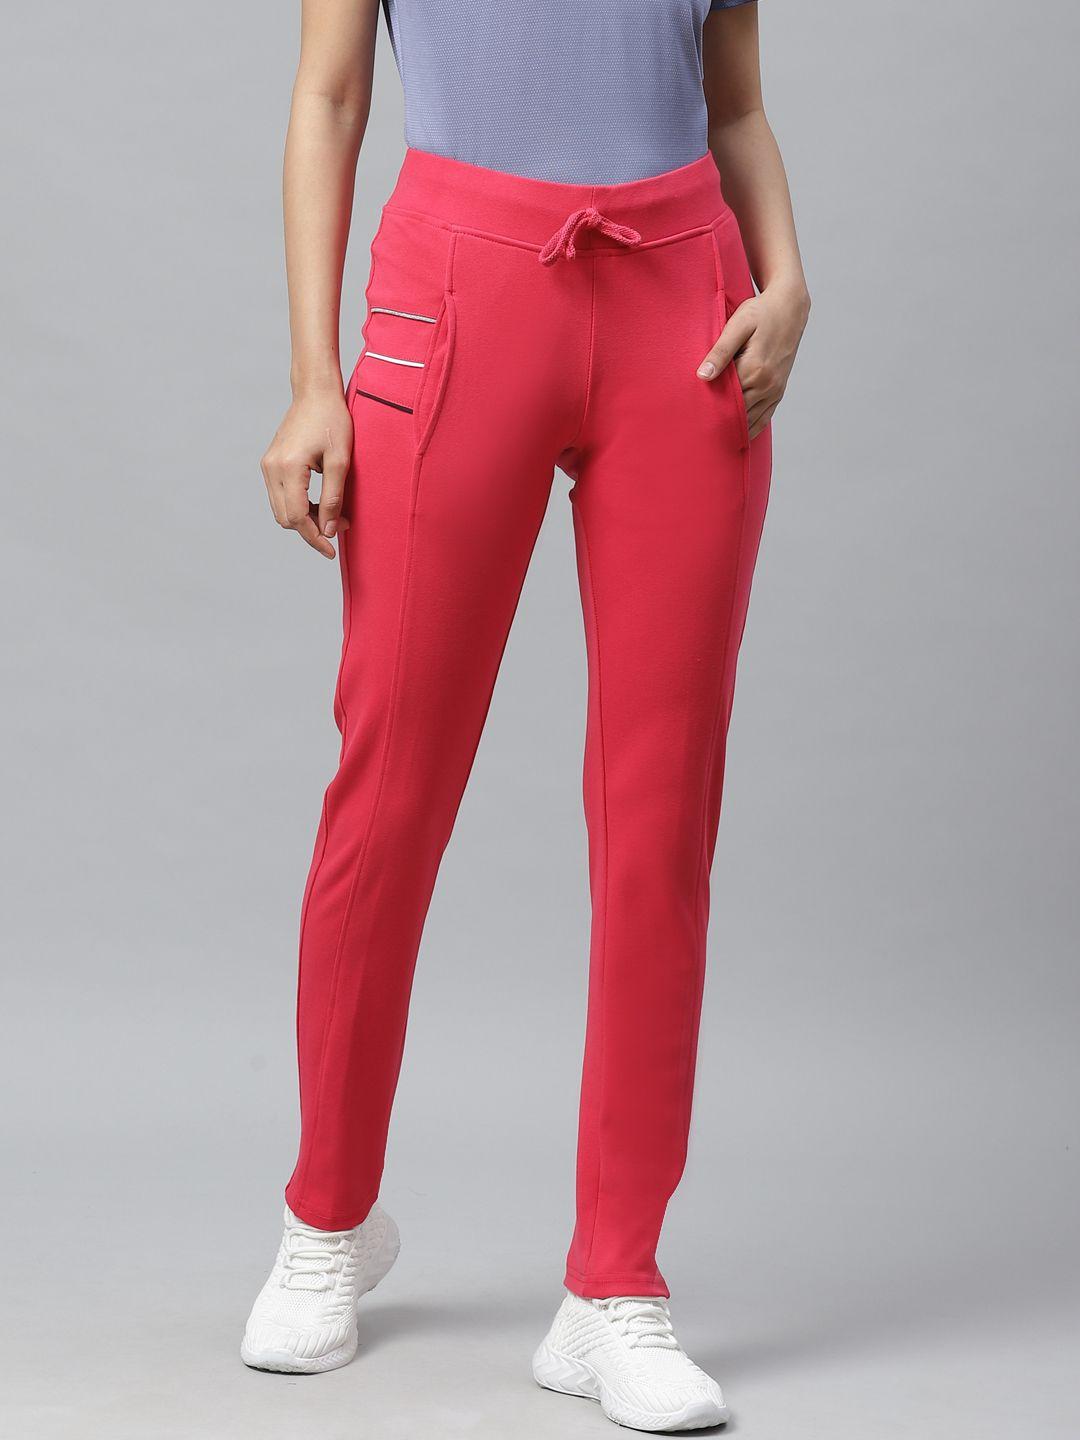 cayman women pink solid track pants